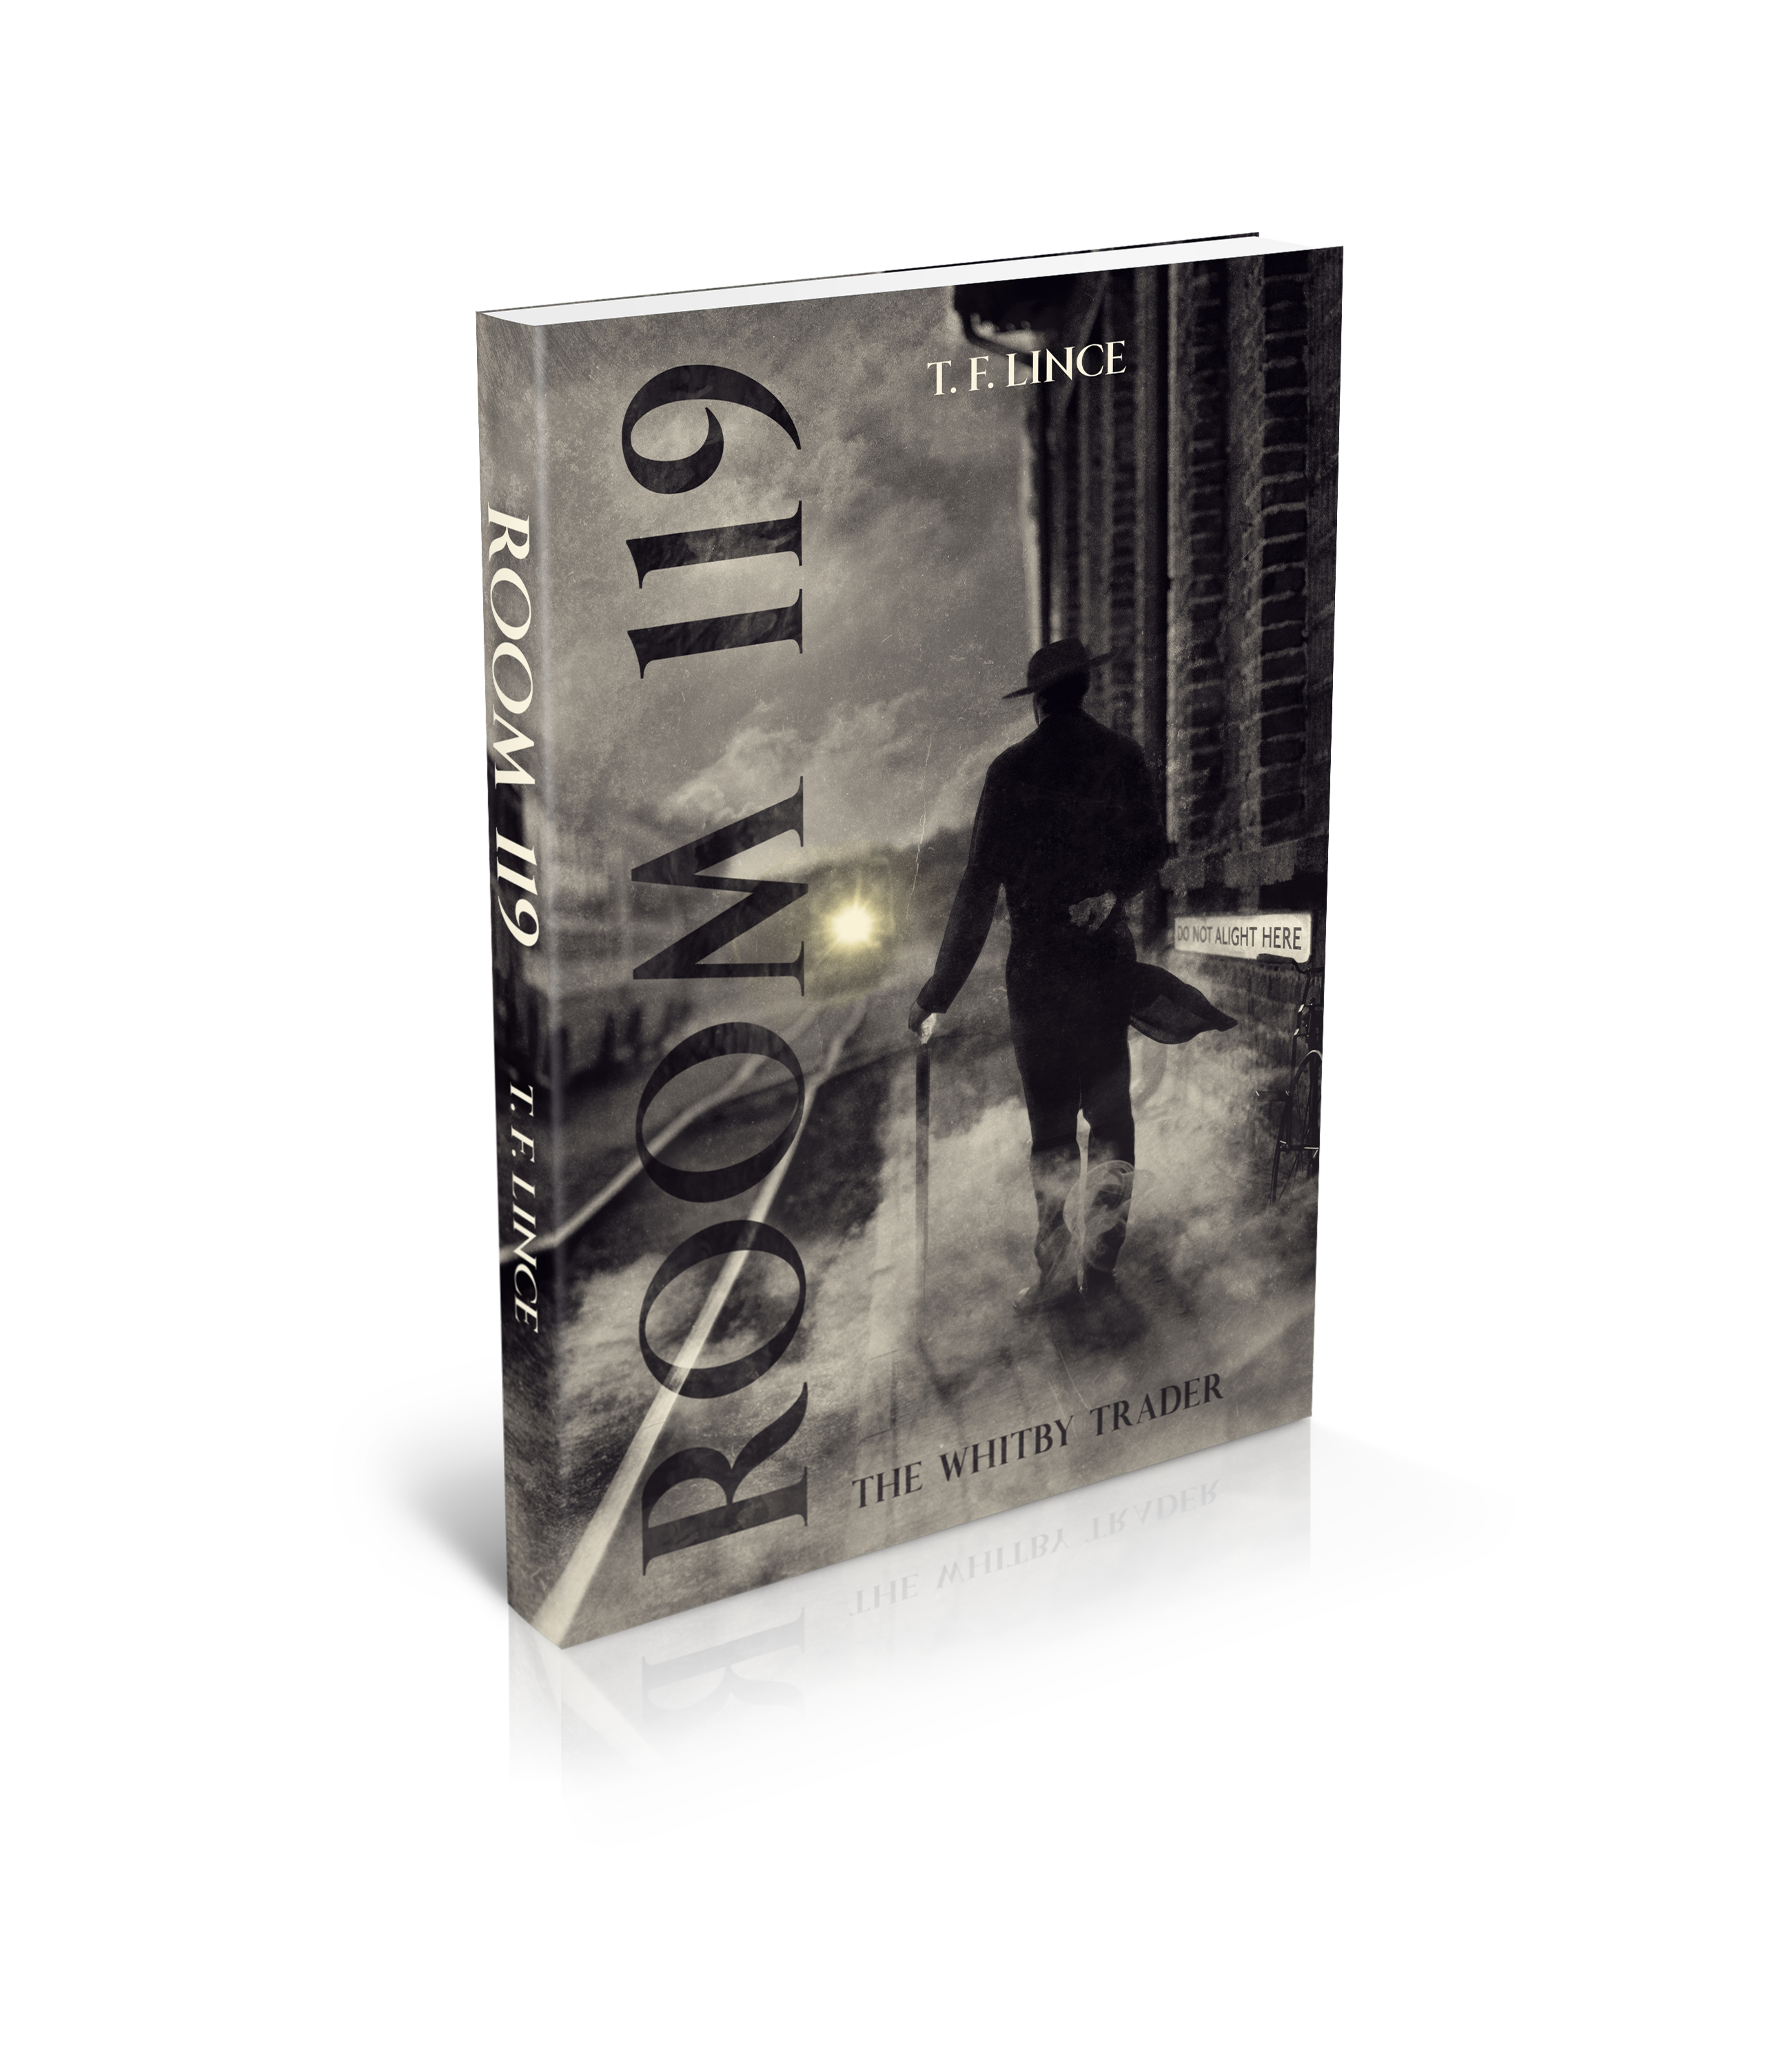 Mystery thriller urban fantasy full of suspense and intrigue.